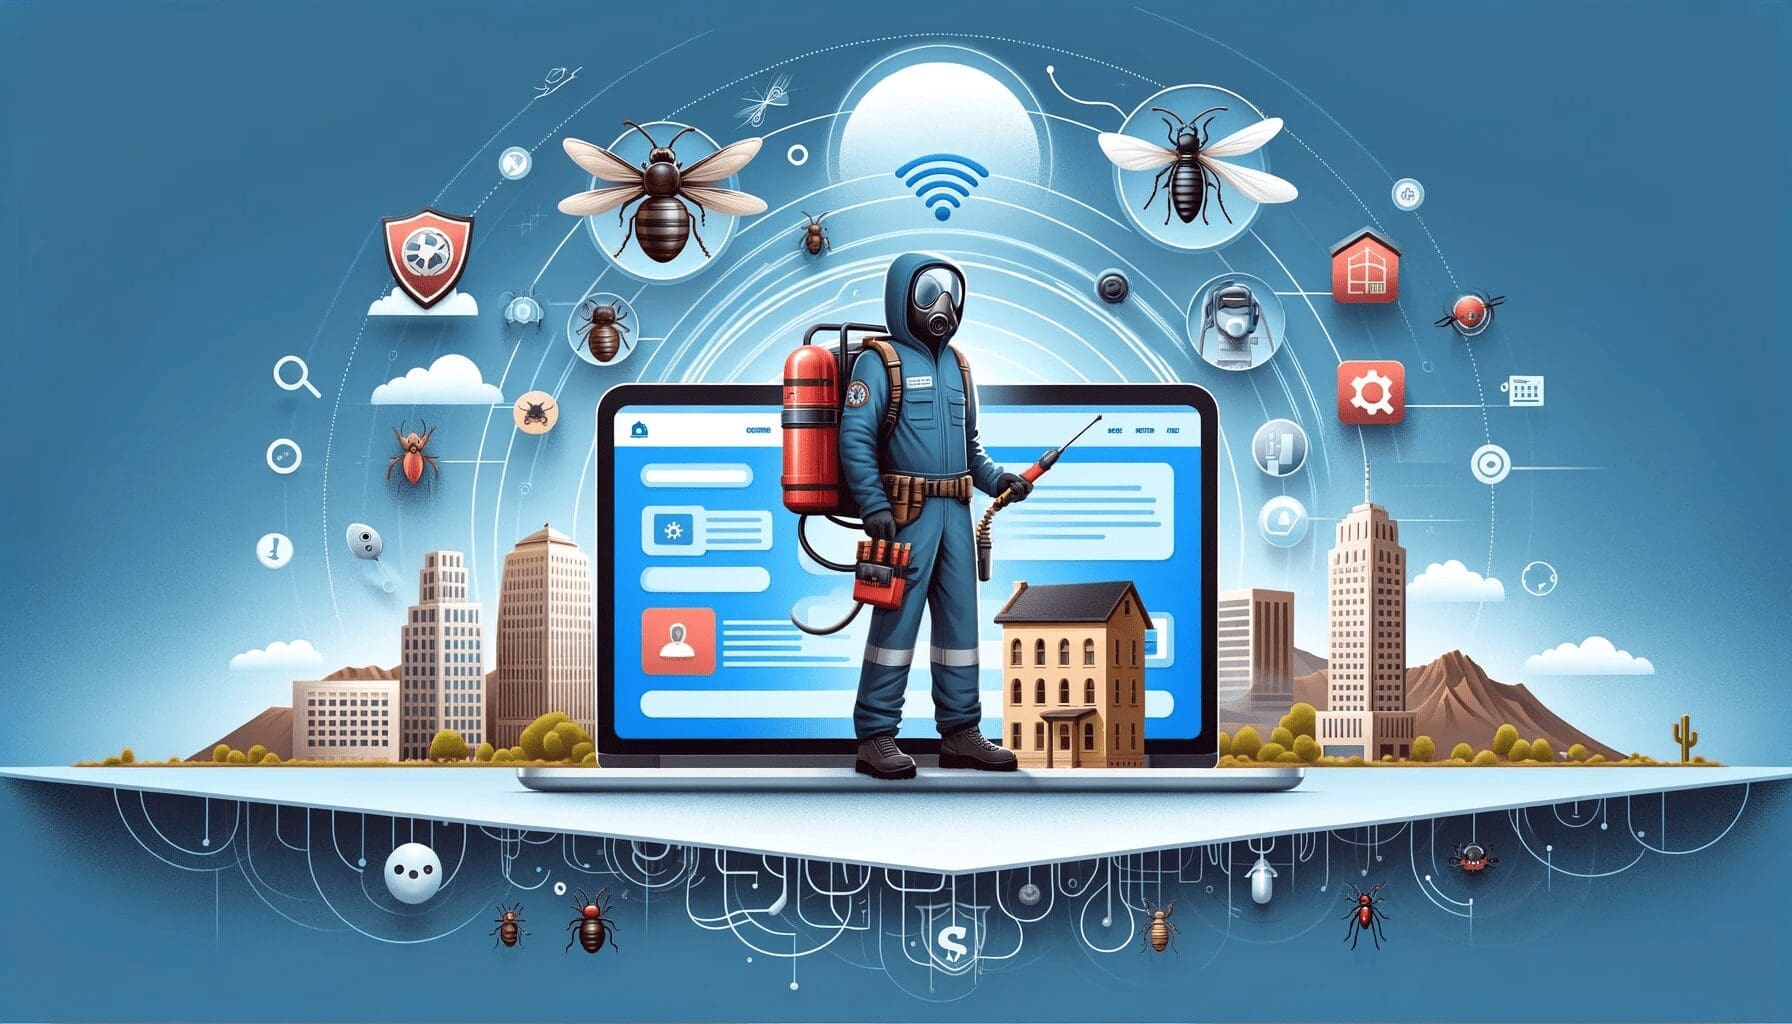 A graphic of a pest control person in a pest control suit in front of a laptop showing a pest control website. In the background is the Albuquerque horizon. Images of bugs and other pests circle the image.